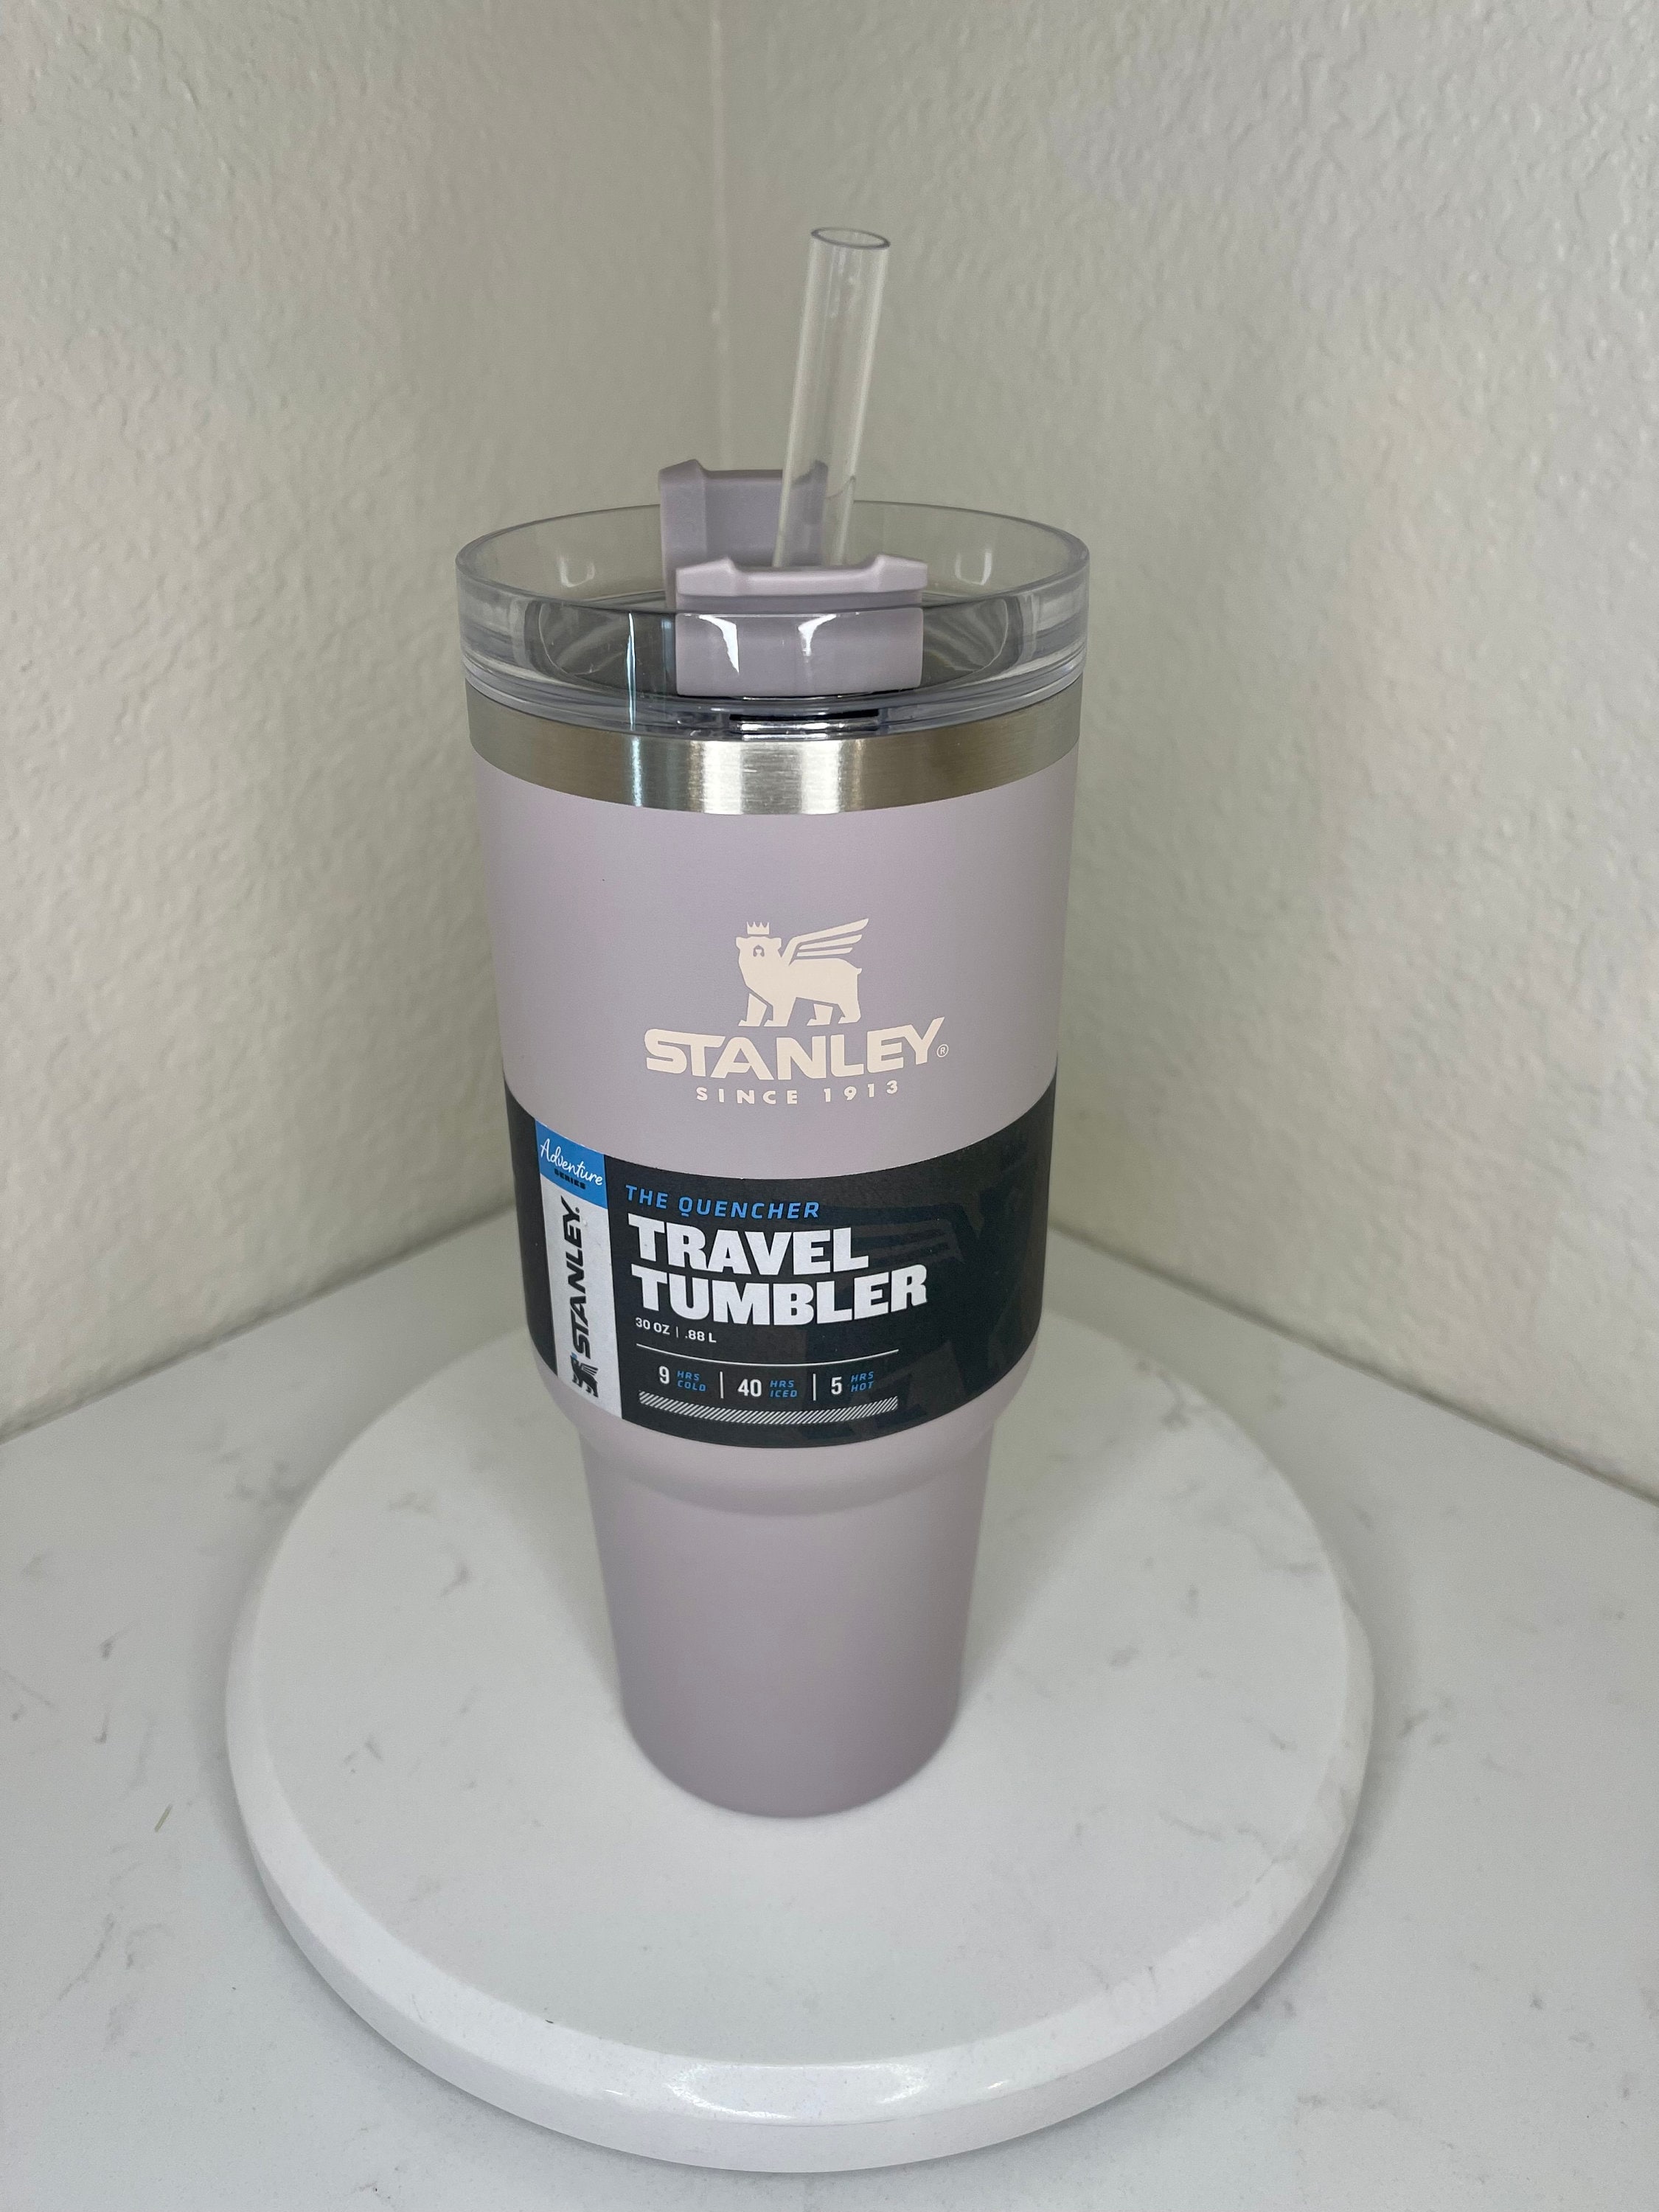 $14/mo - Finance Stanley Adventure Quencher Travel Tumbler 30oz Abalone